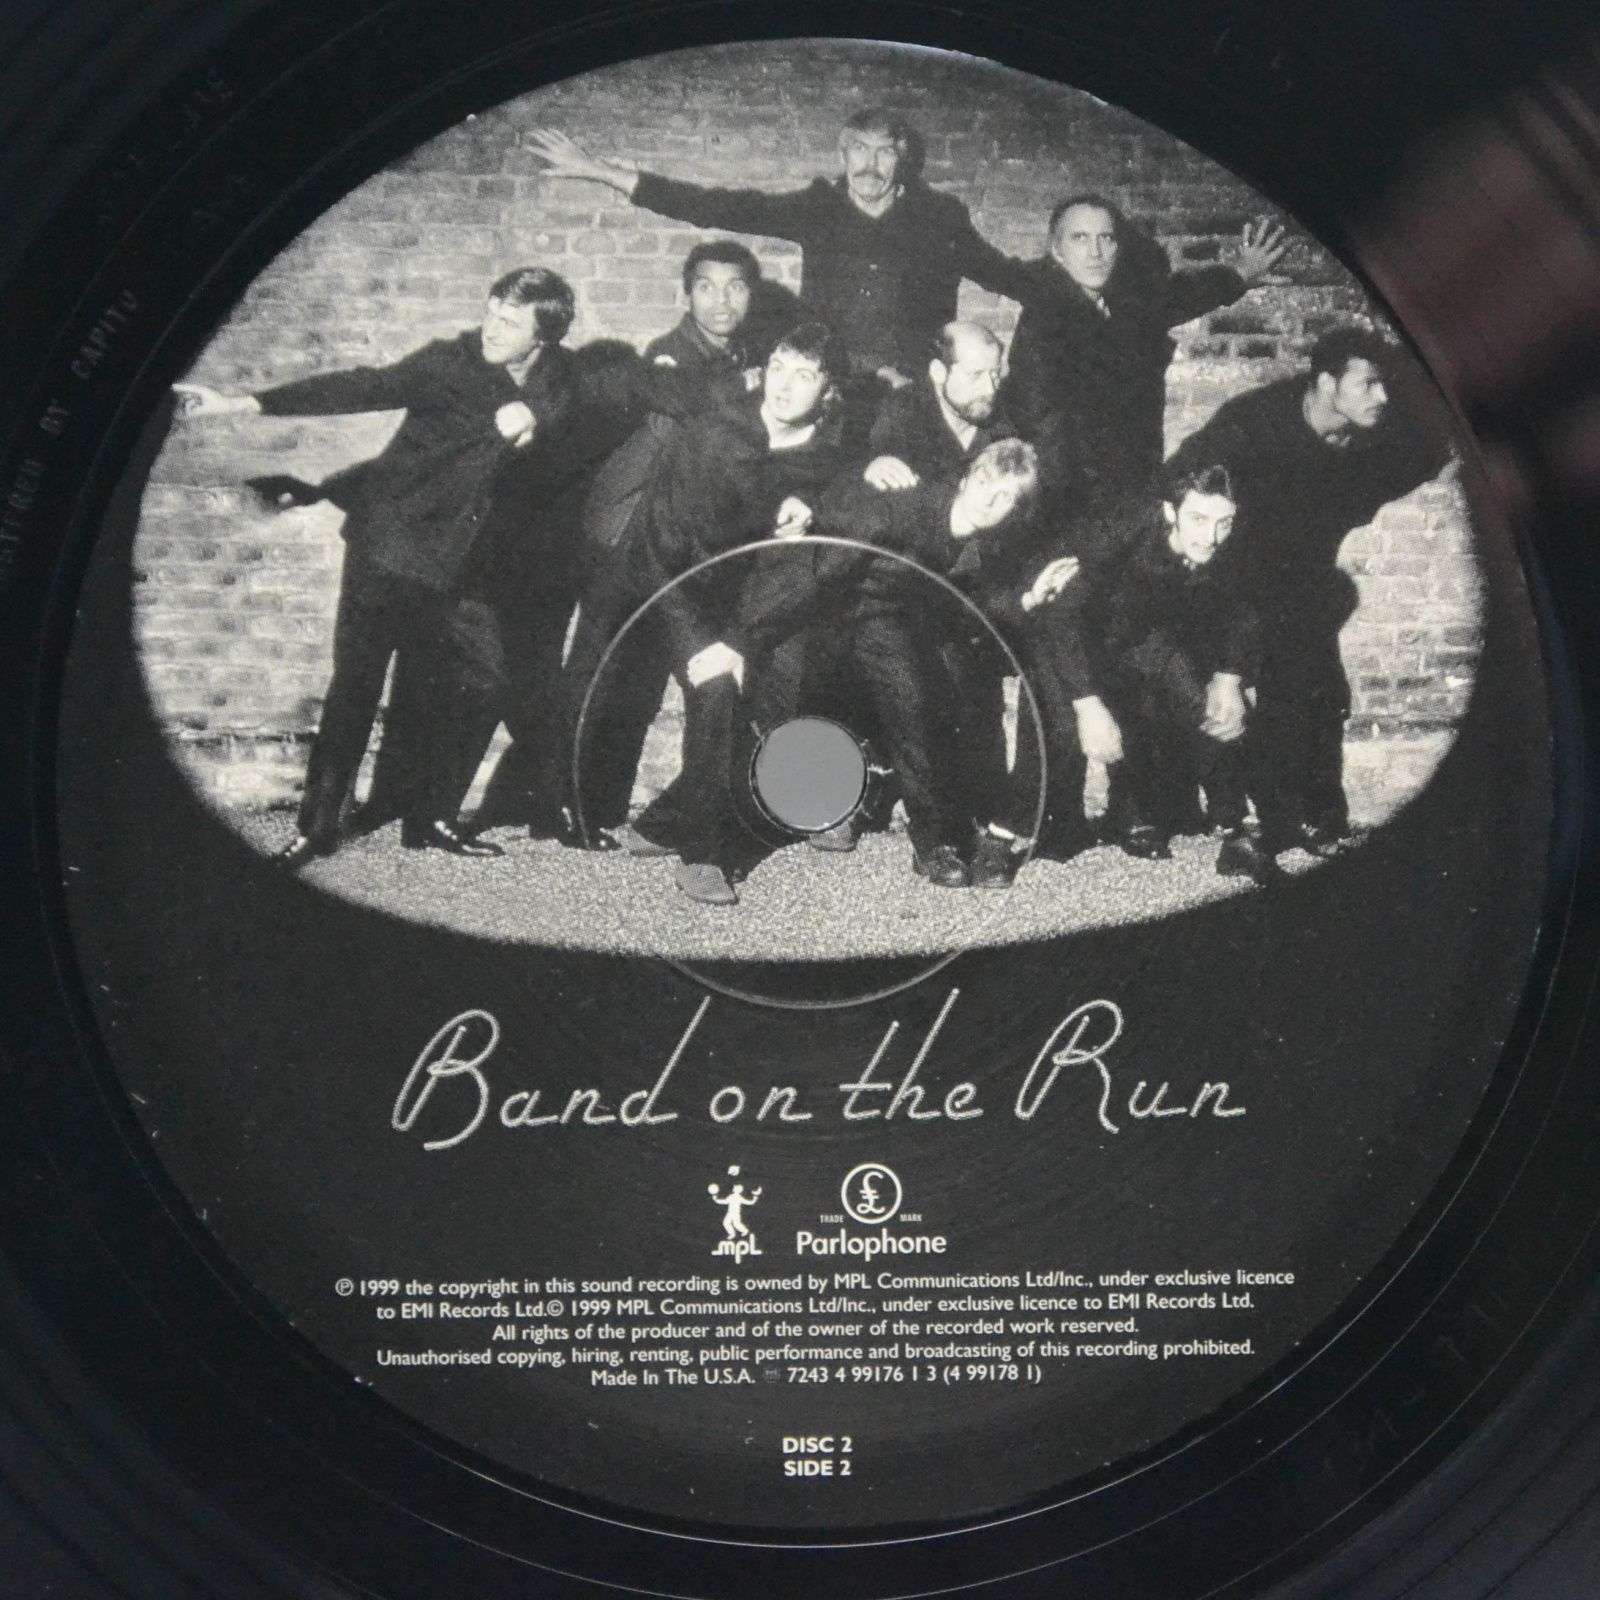 Paul McCartney & Wings — Band On The Run (2LP, USA, posters), 1973